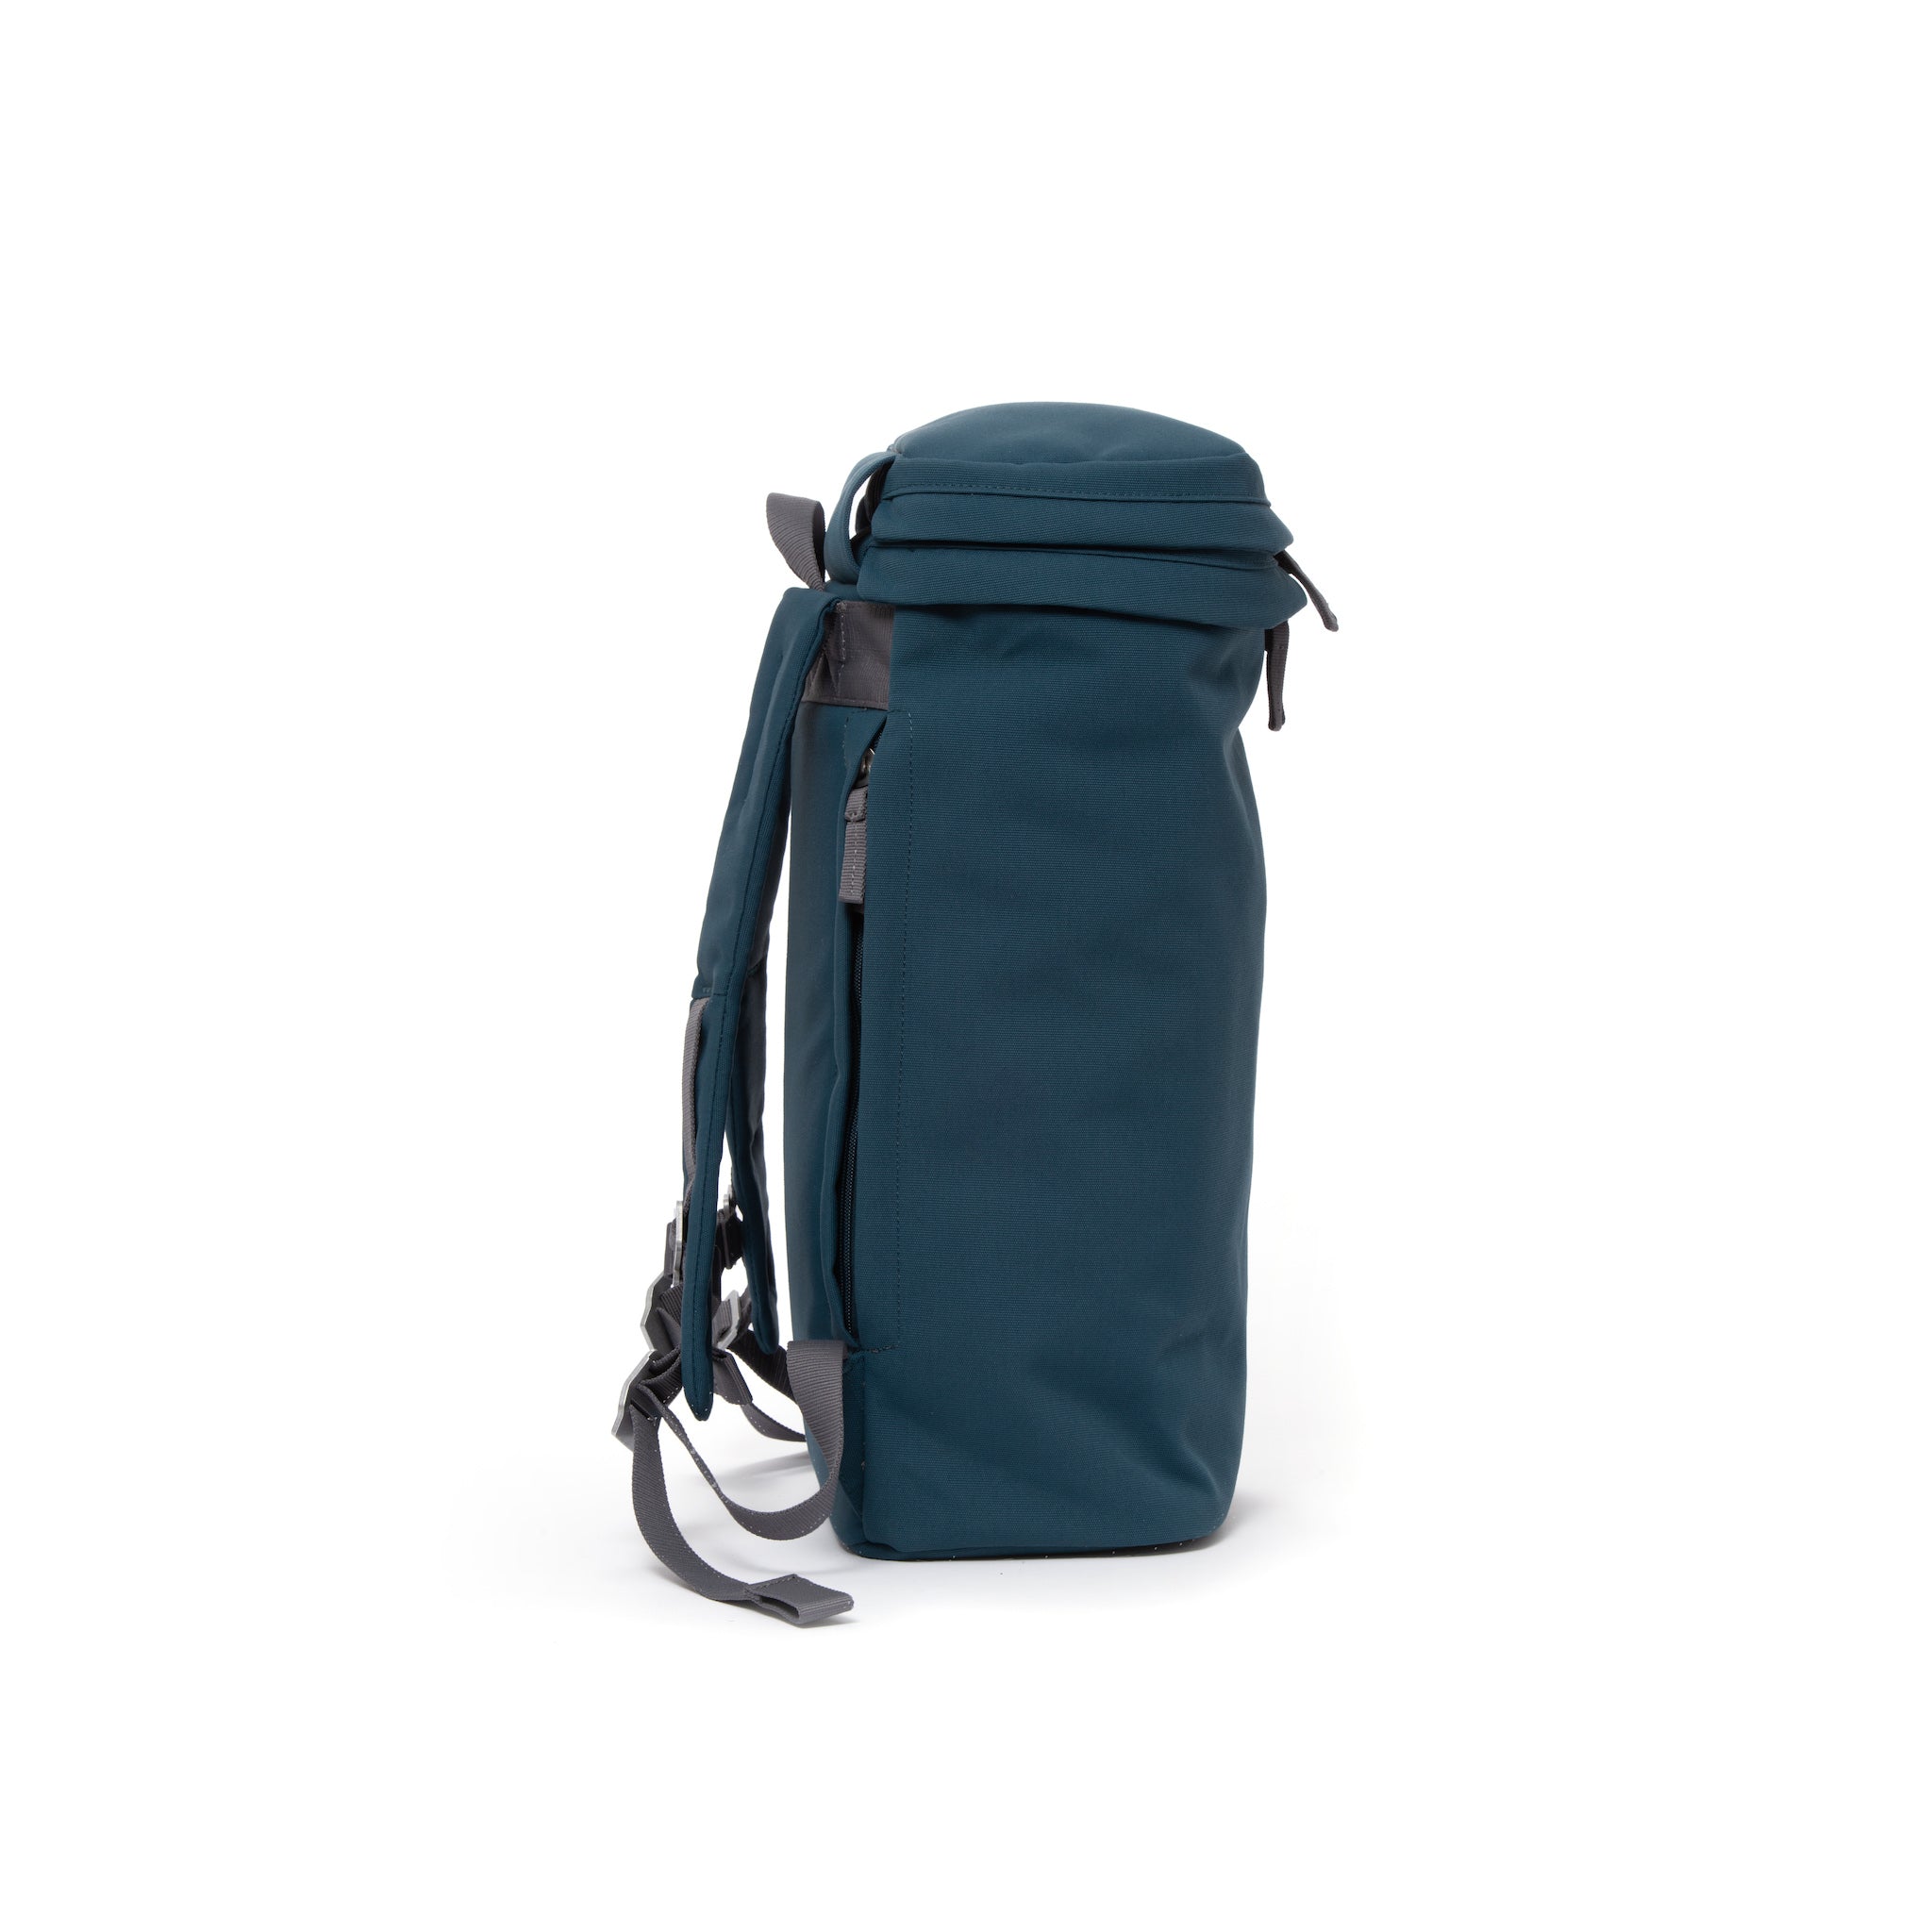 Blue canvas backpack with top zip pocket.